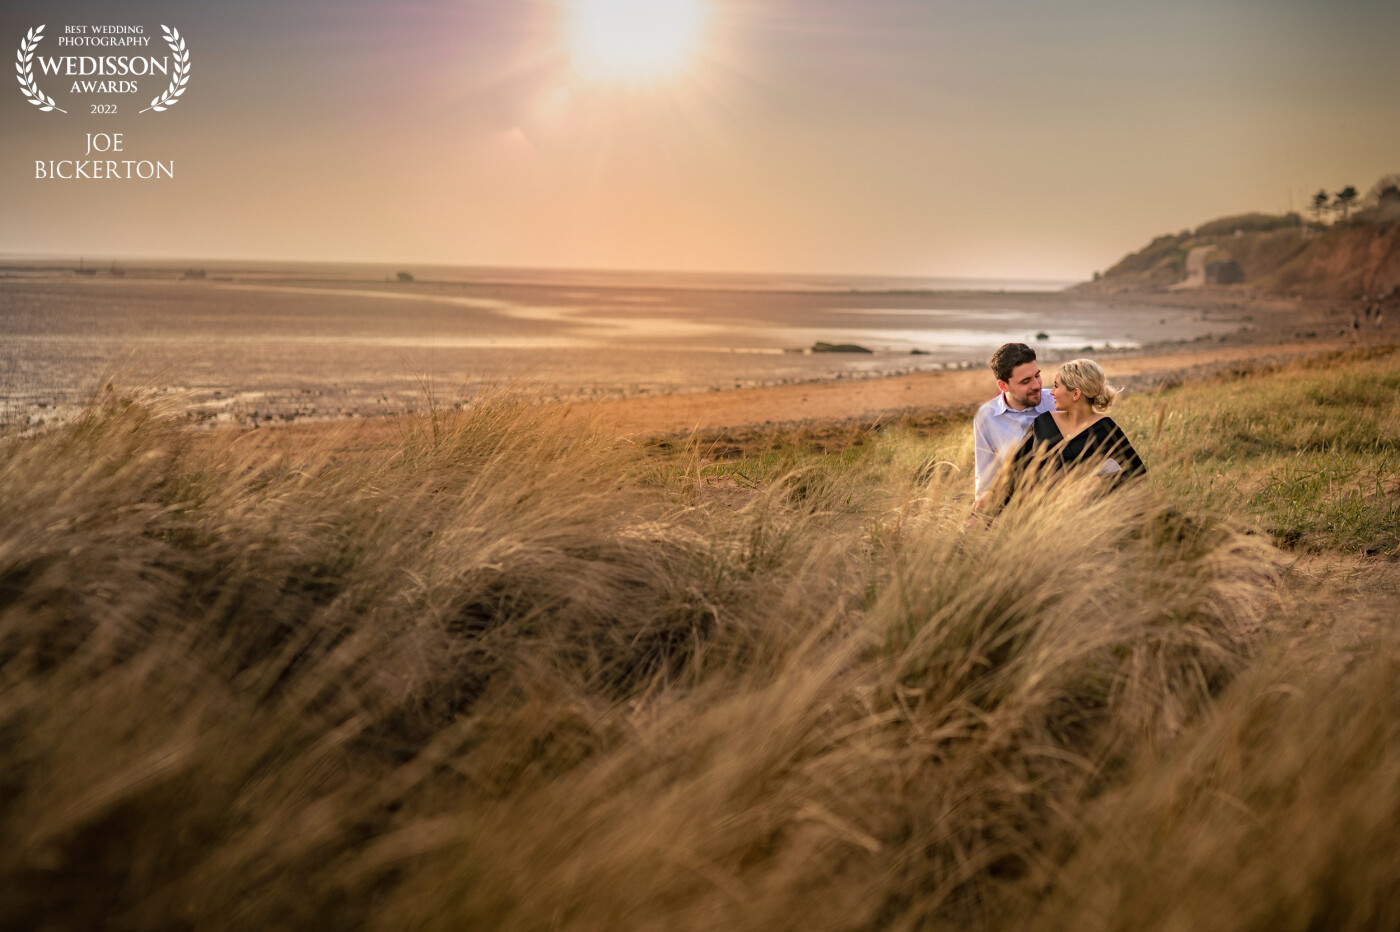 Amy & Tom's pre-wedding shoot.  This beach on the Wirral, England has incredible sunsets.  Amy & Tom are lit by an OCF flash - probably on 1/128 power with a mag-grid, allowing me to lower the exposure of the overall image to try and preserve some of the sun's highlights.